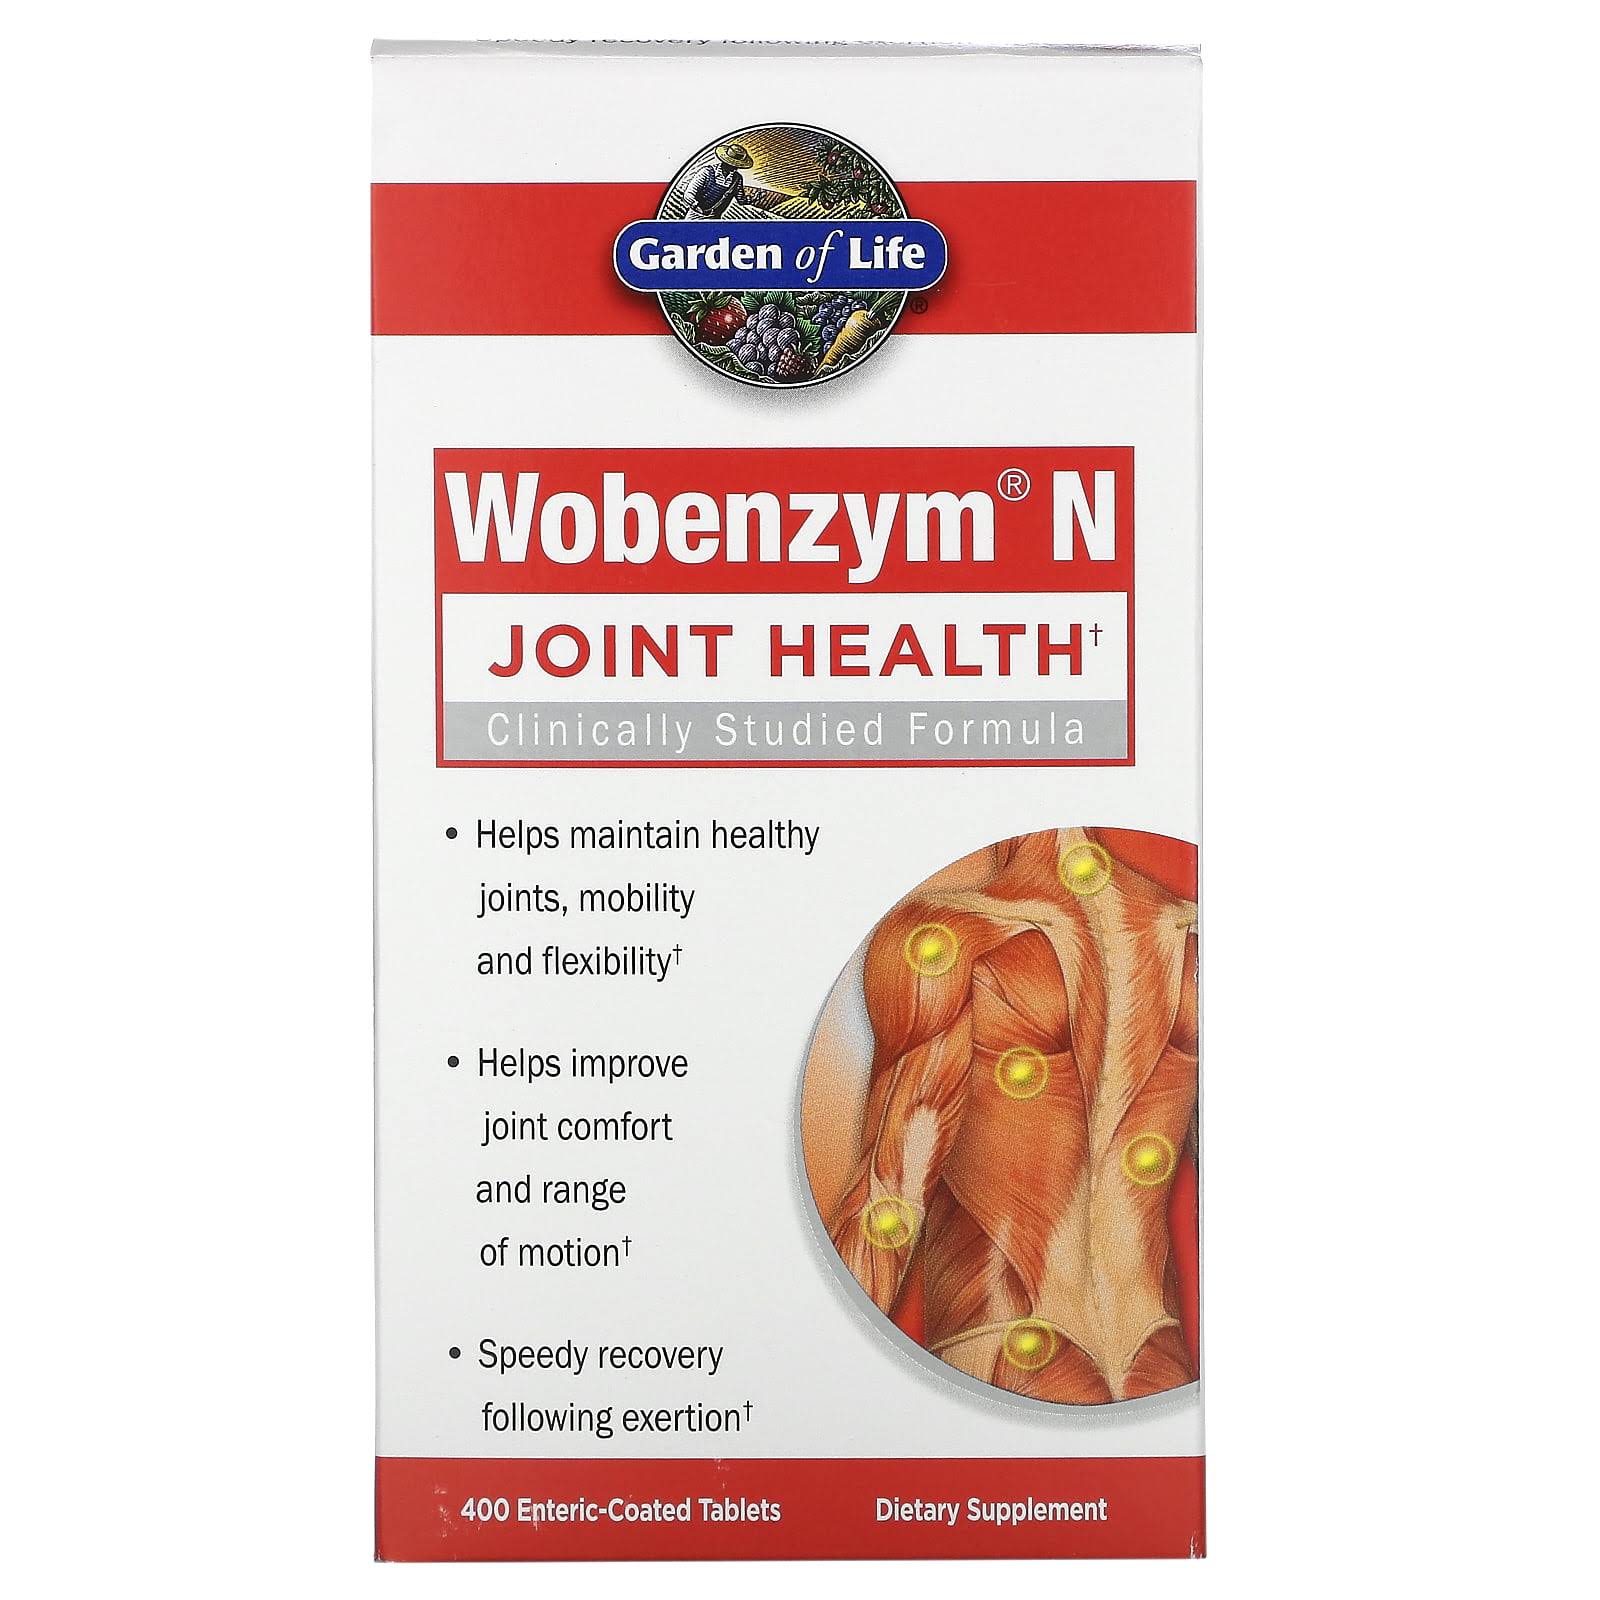 Garden of Life Wobenzym N Healthy Inflammation & Joint Support - 400 Tablets